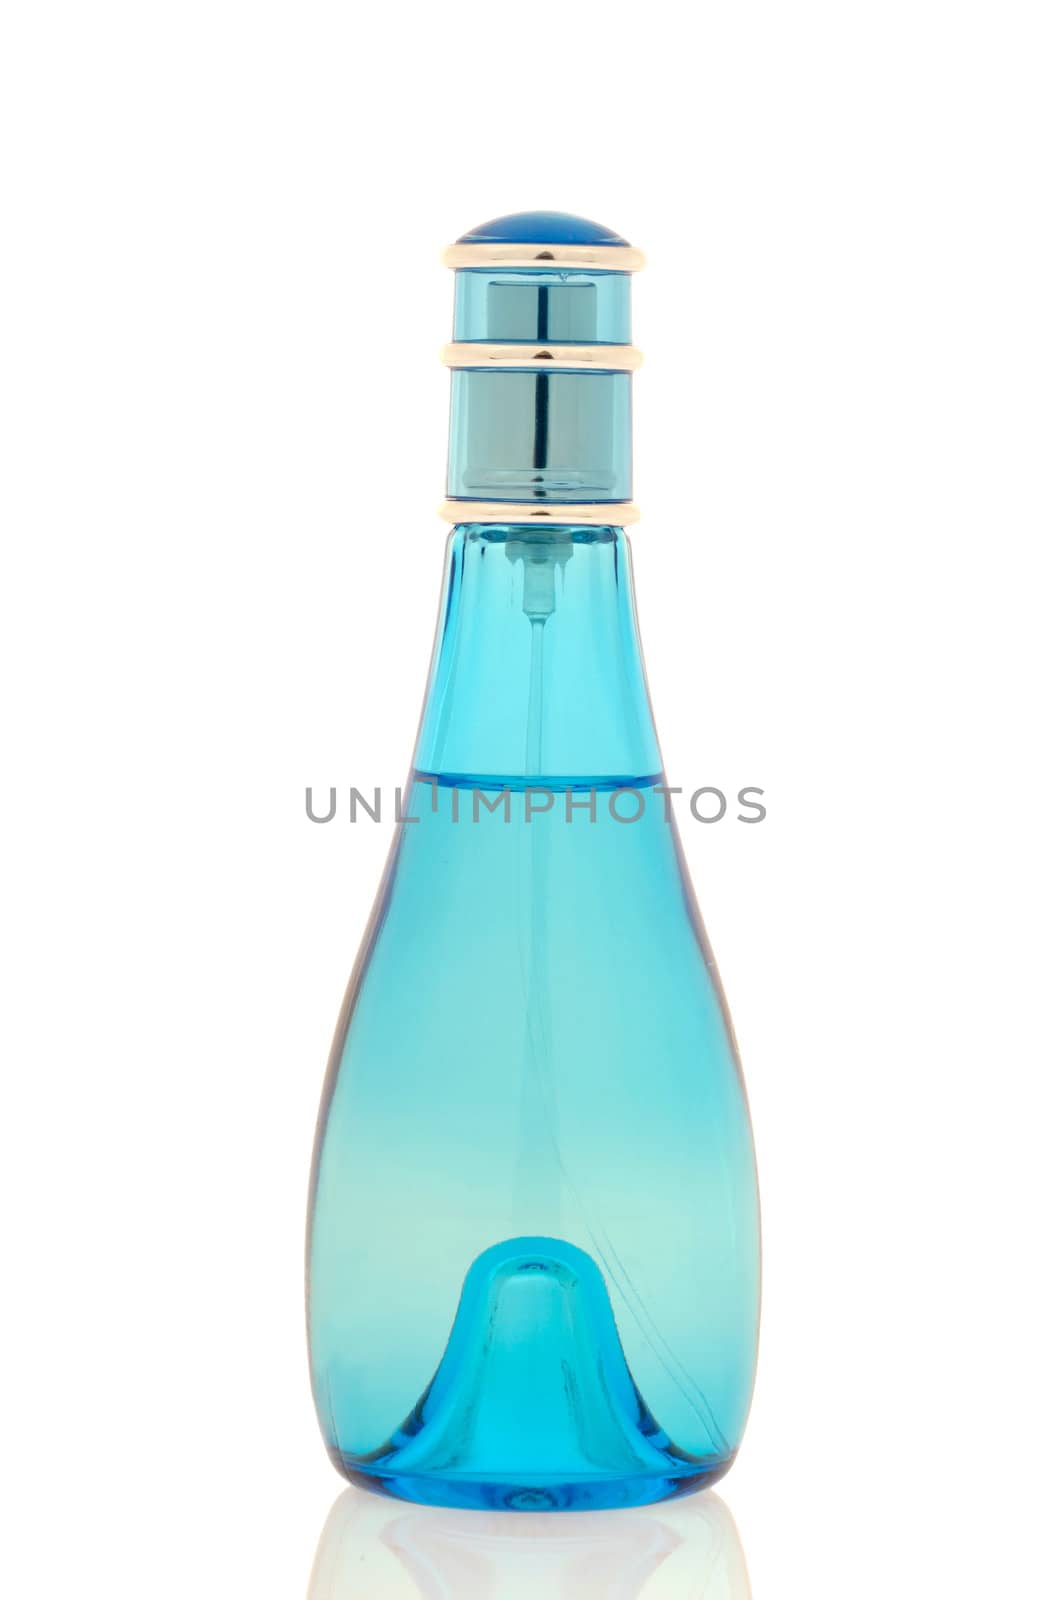 Perfume in an elegant bottle on a clean white background